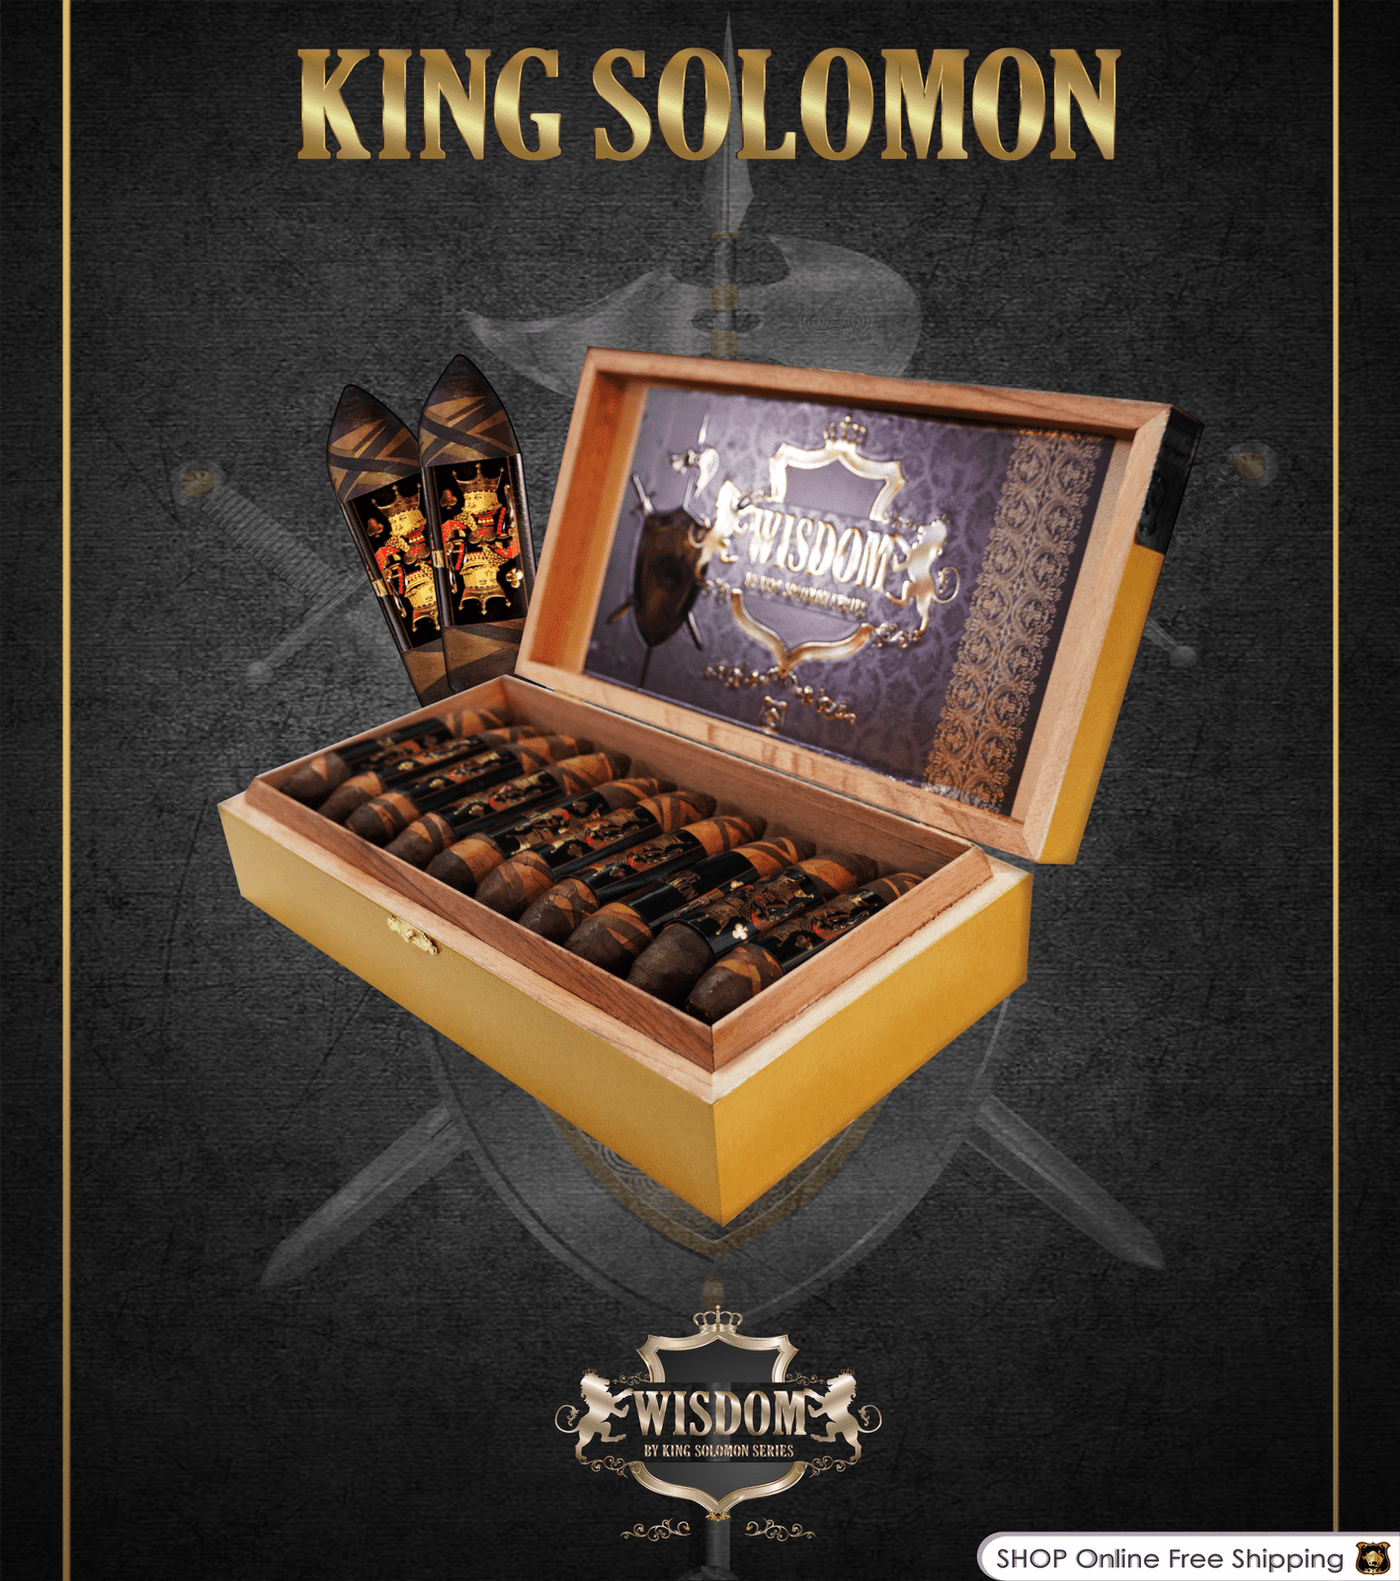 Wisdom 4x60 Cigar From The King Solomon Series: Box of 20